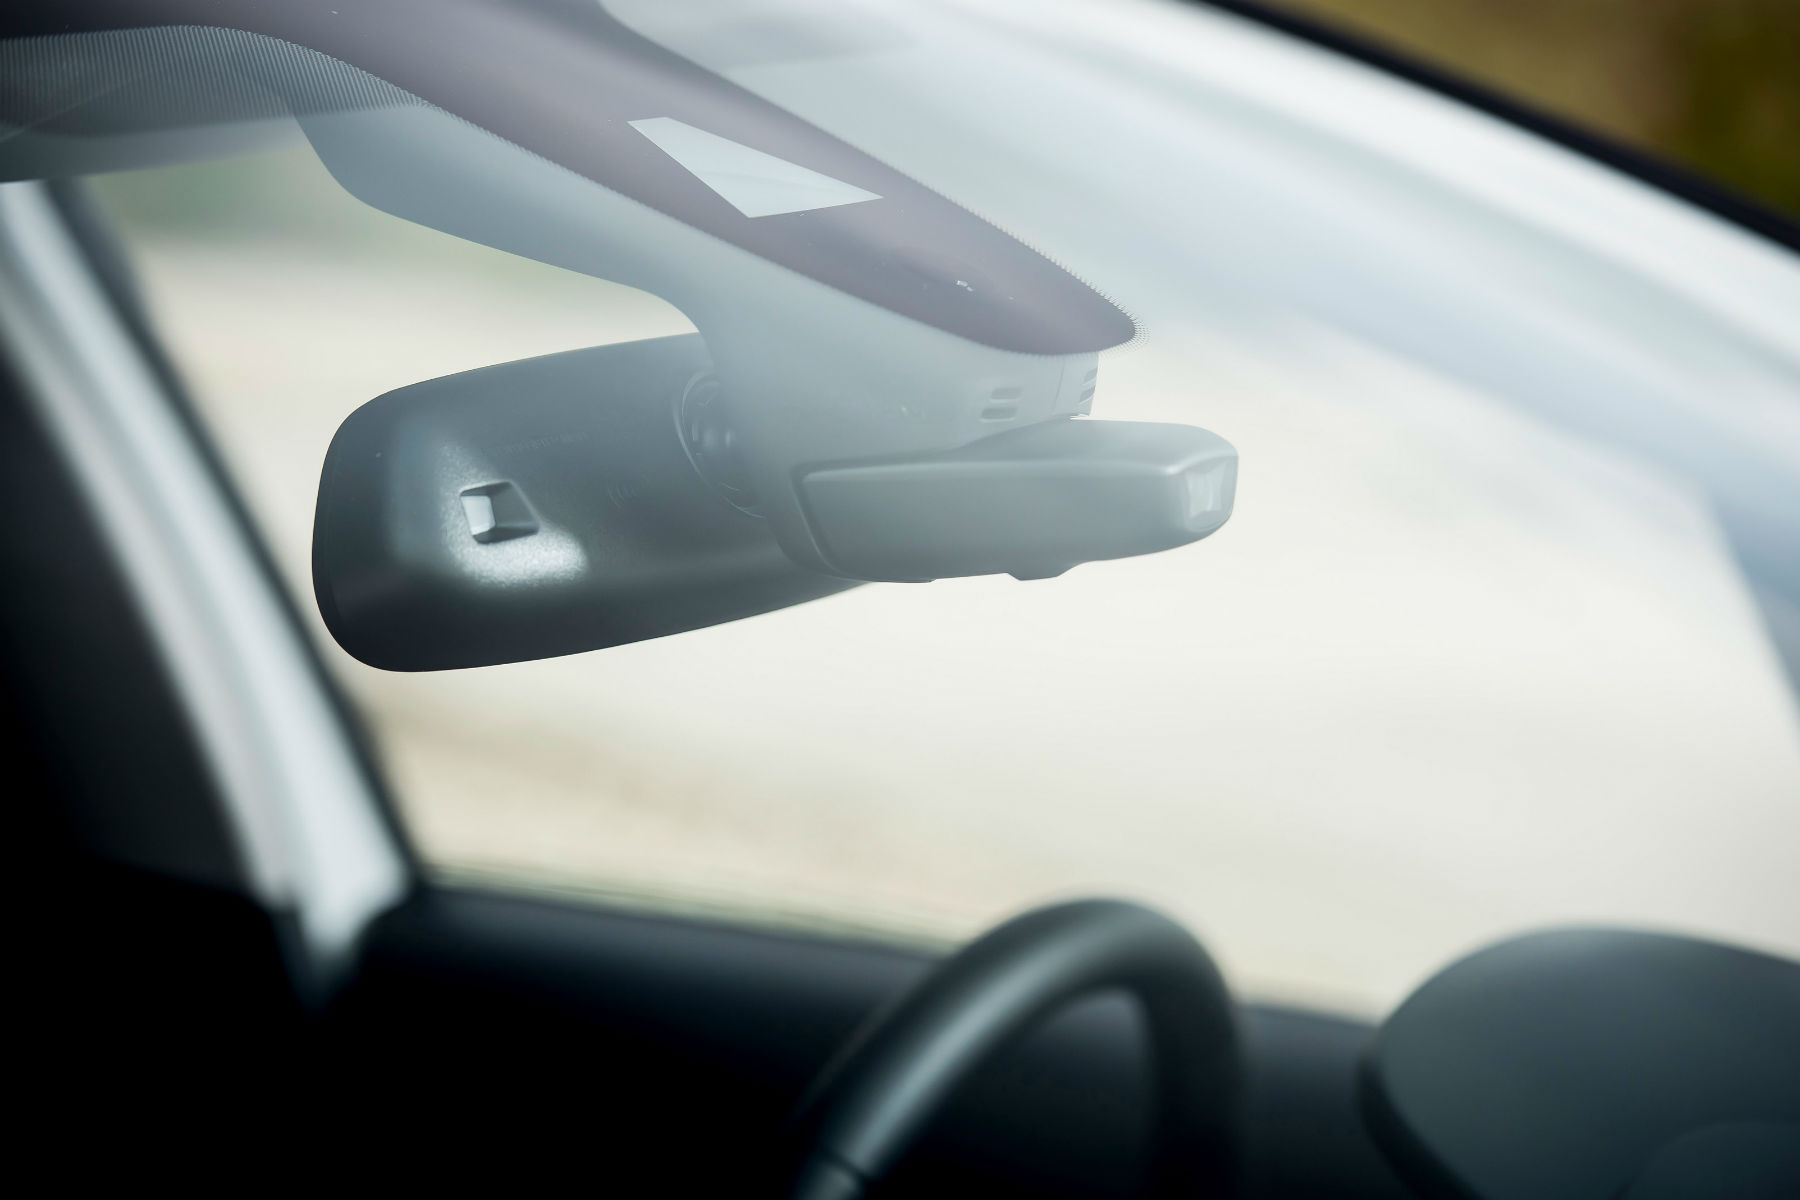 Citroen's ConnectedCam ISN'T distracting for drivers, rules ASA